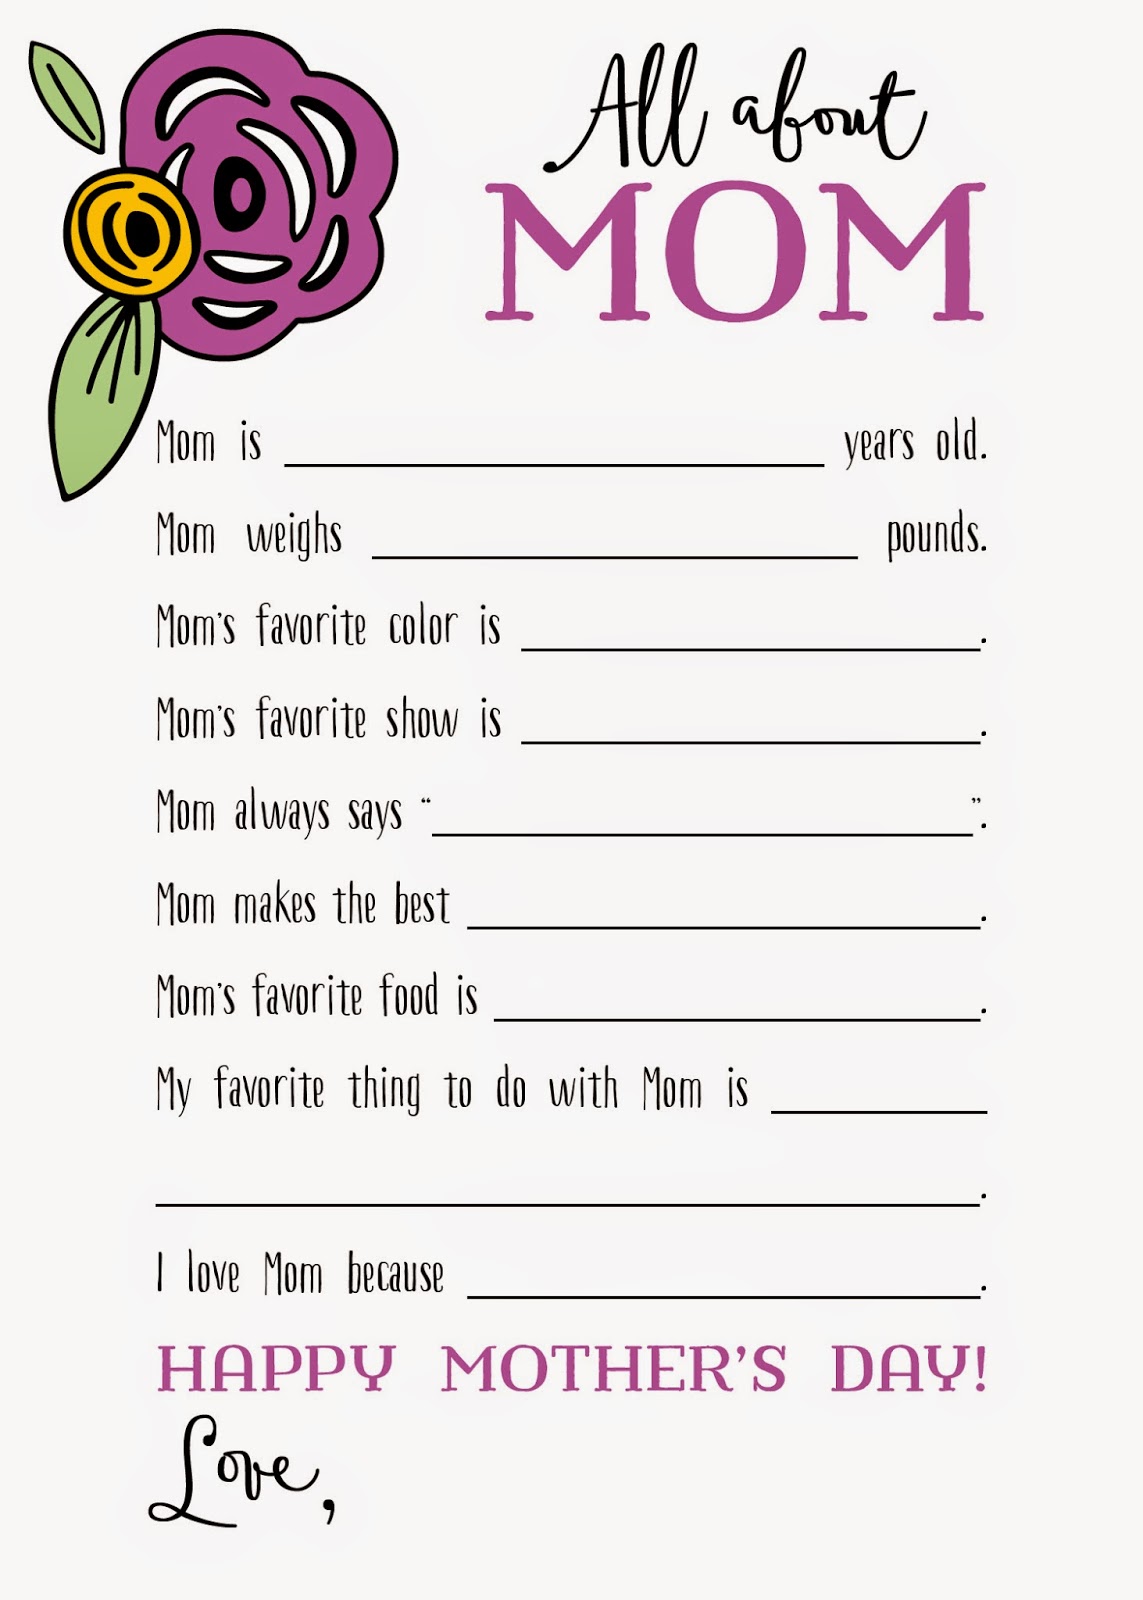 river-bridge-all-about-mom-free-printable